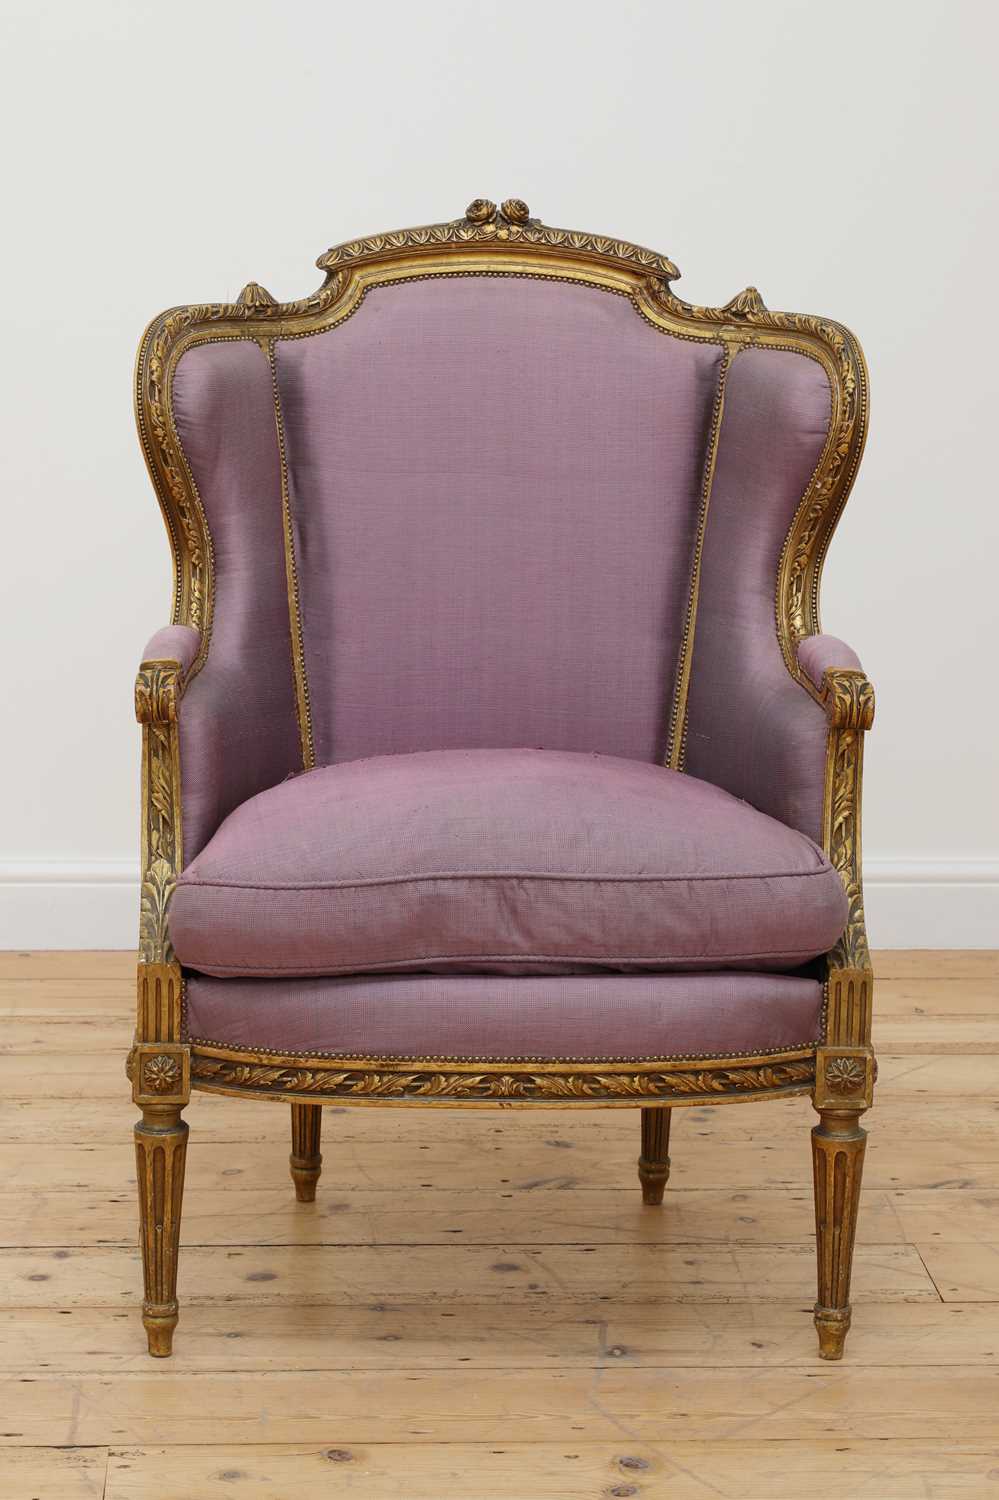 Lot 147 - A Louis XVI-style giltwood fauteuil